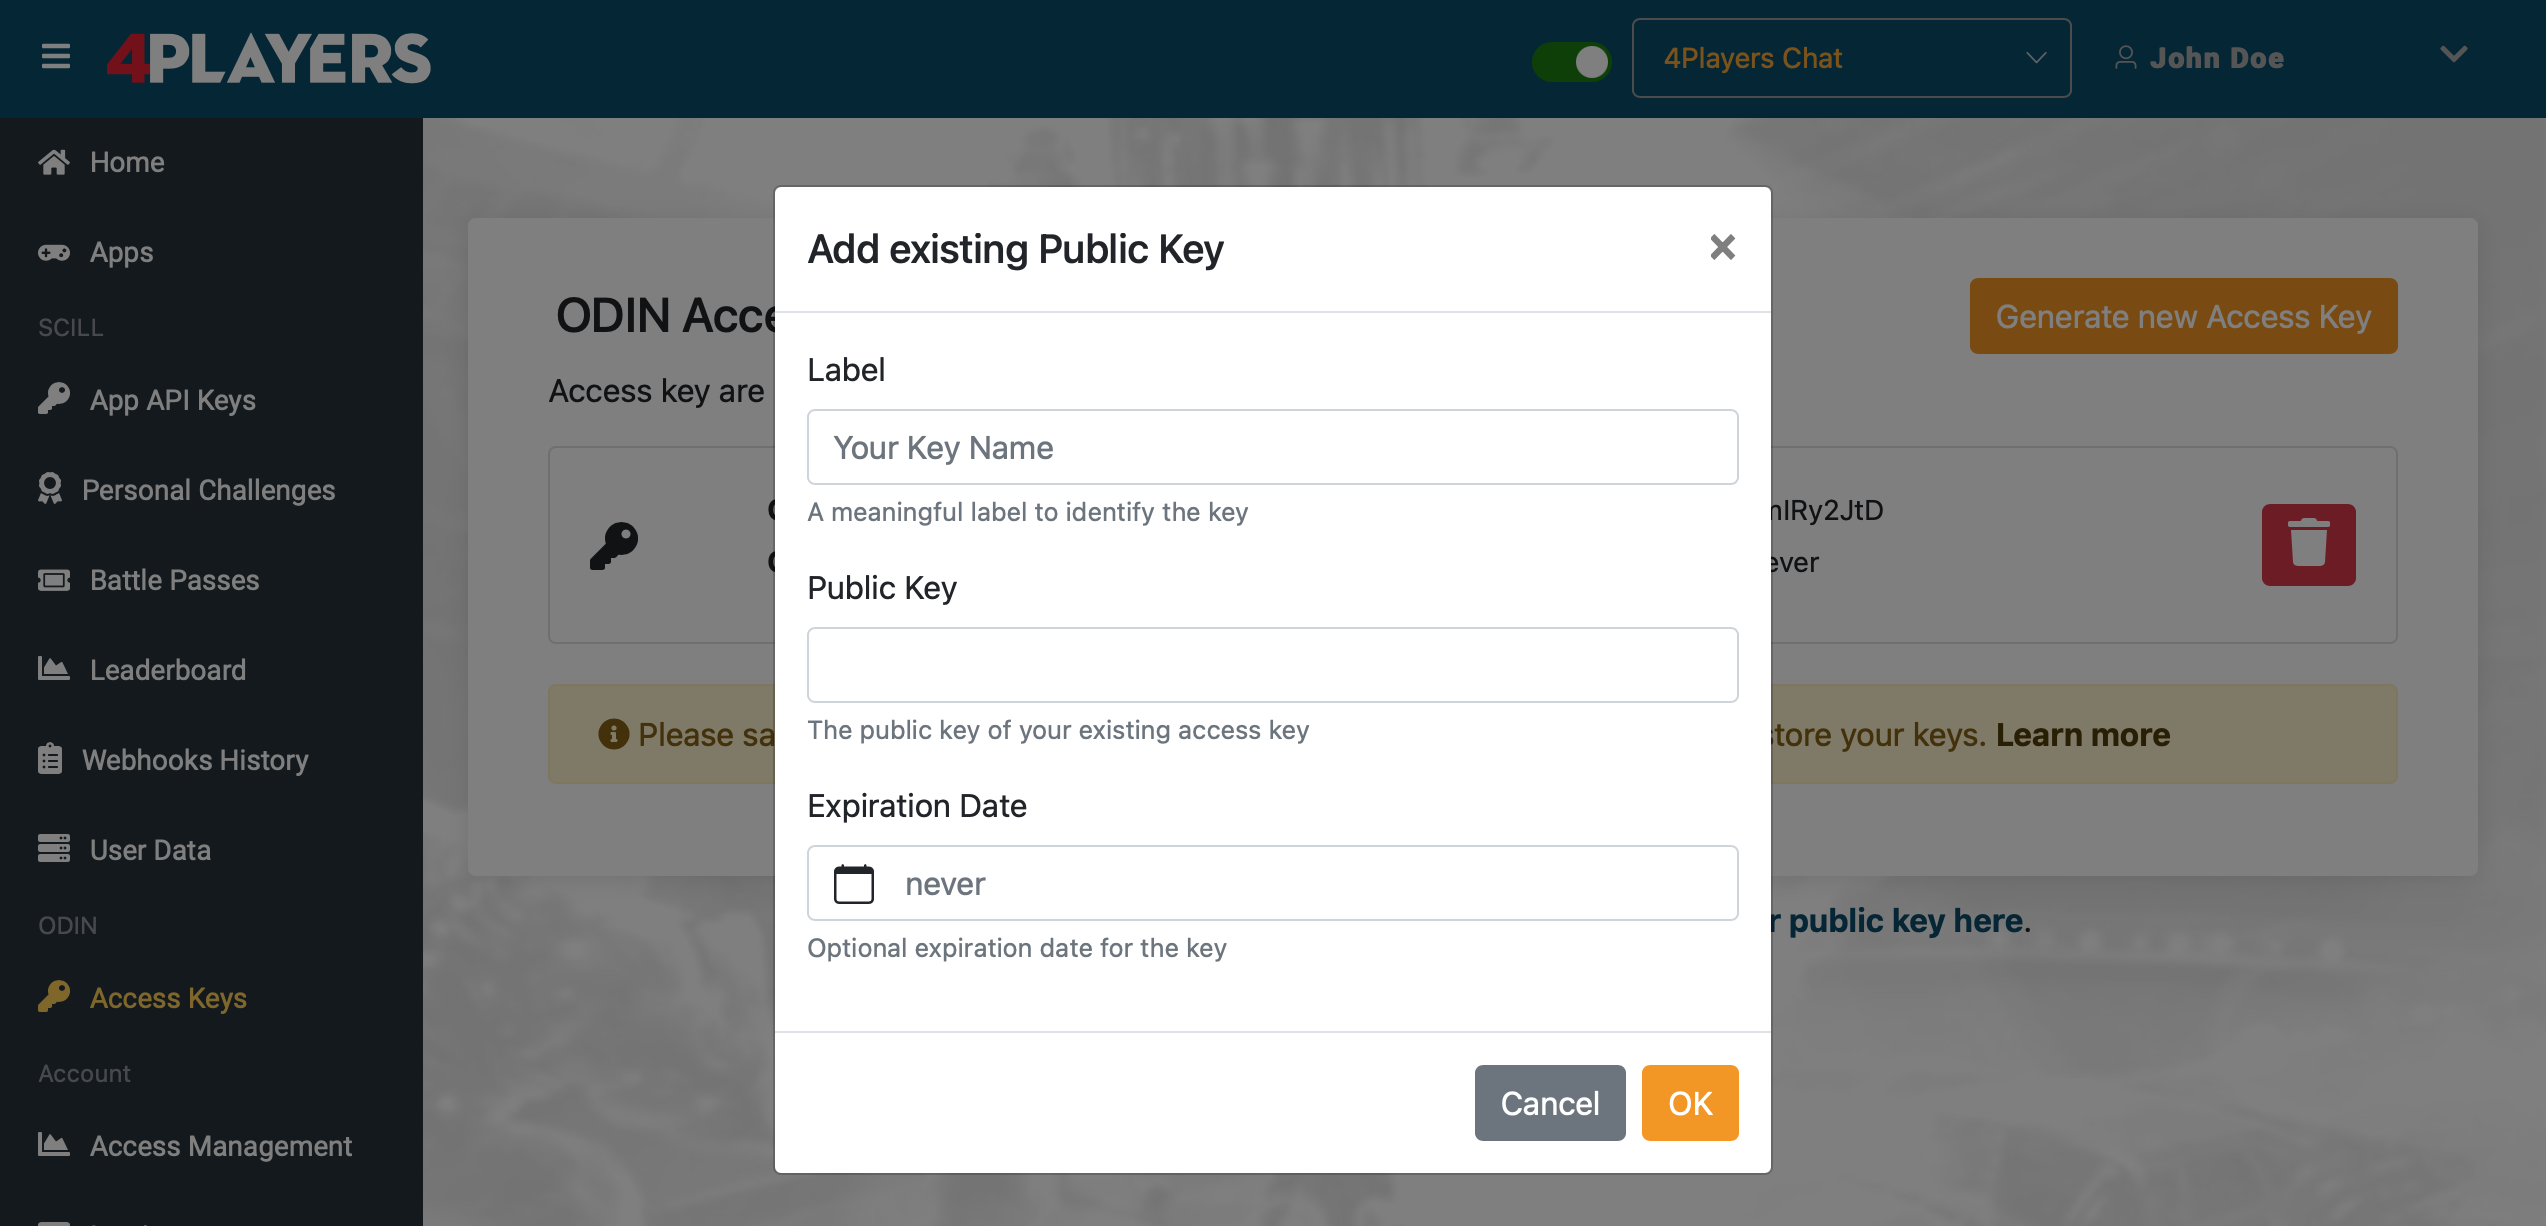 Submit a public key for an existing access key